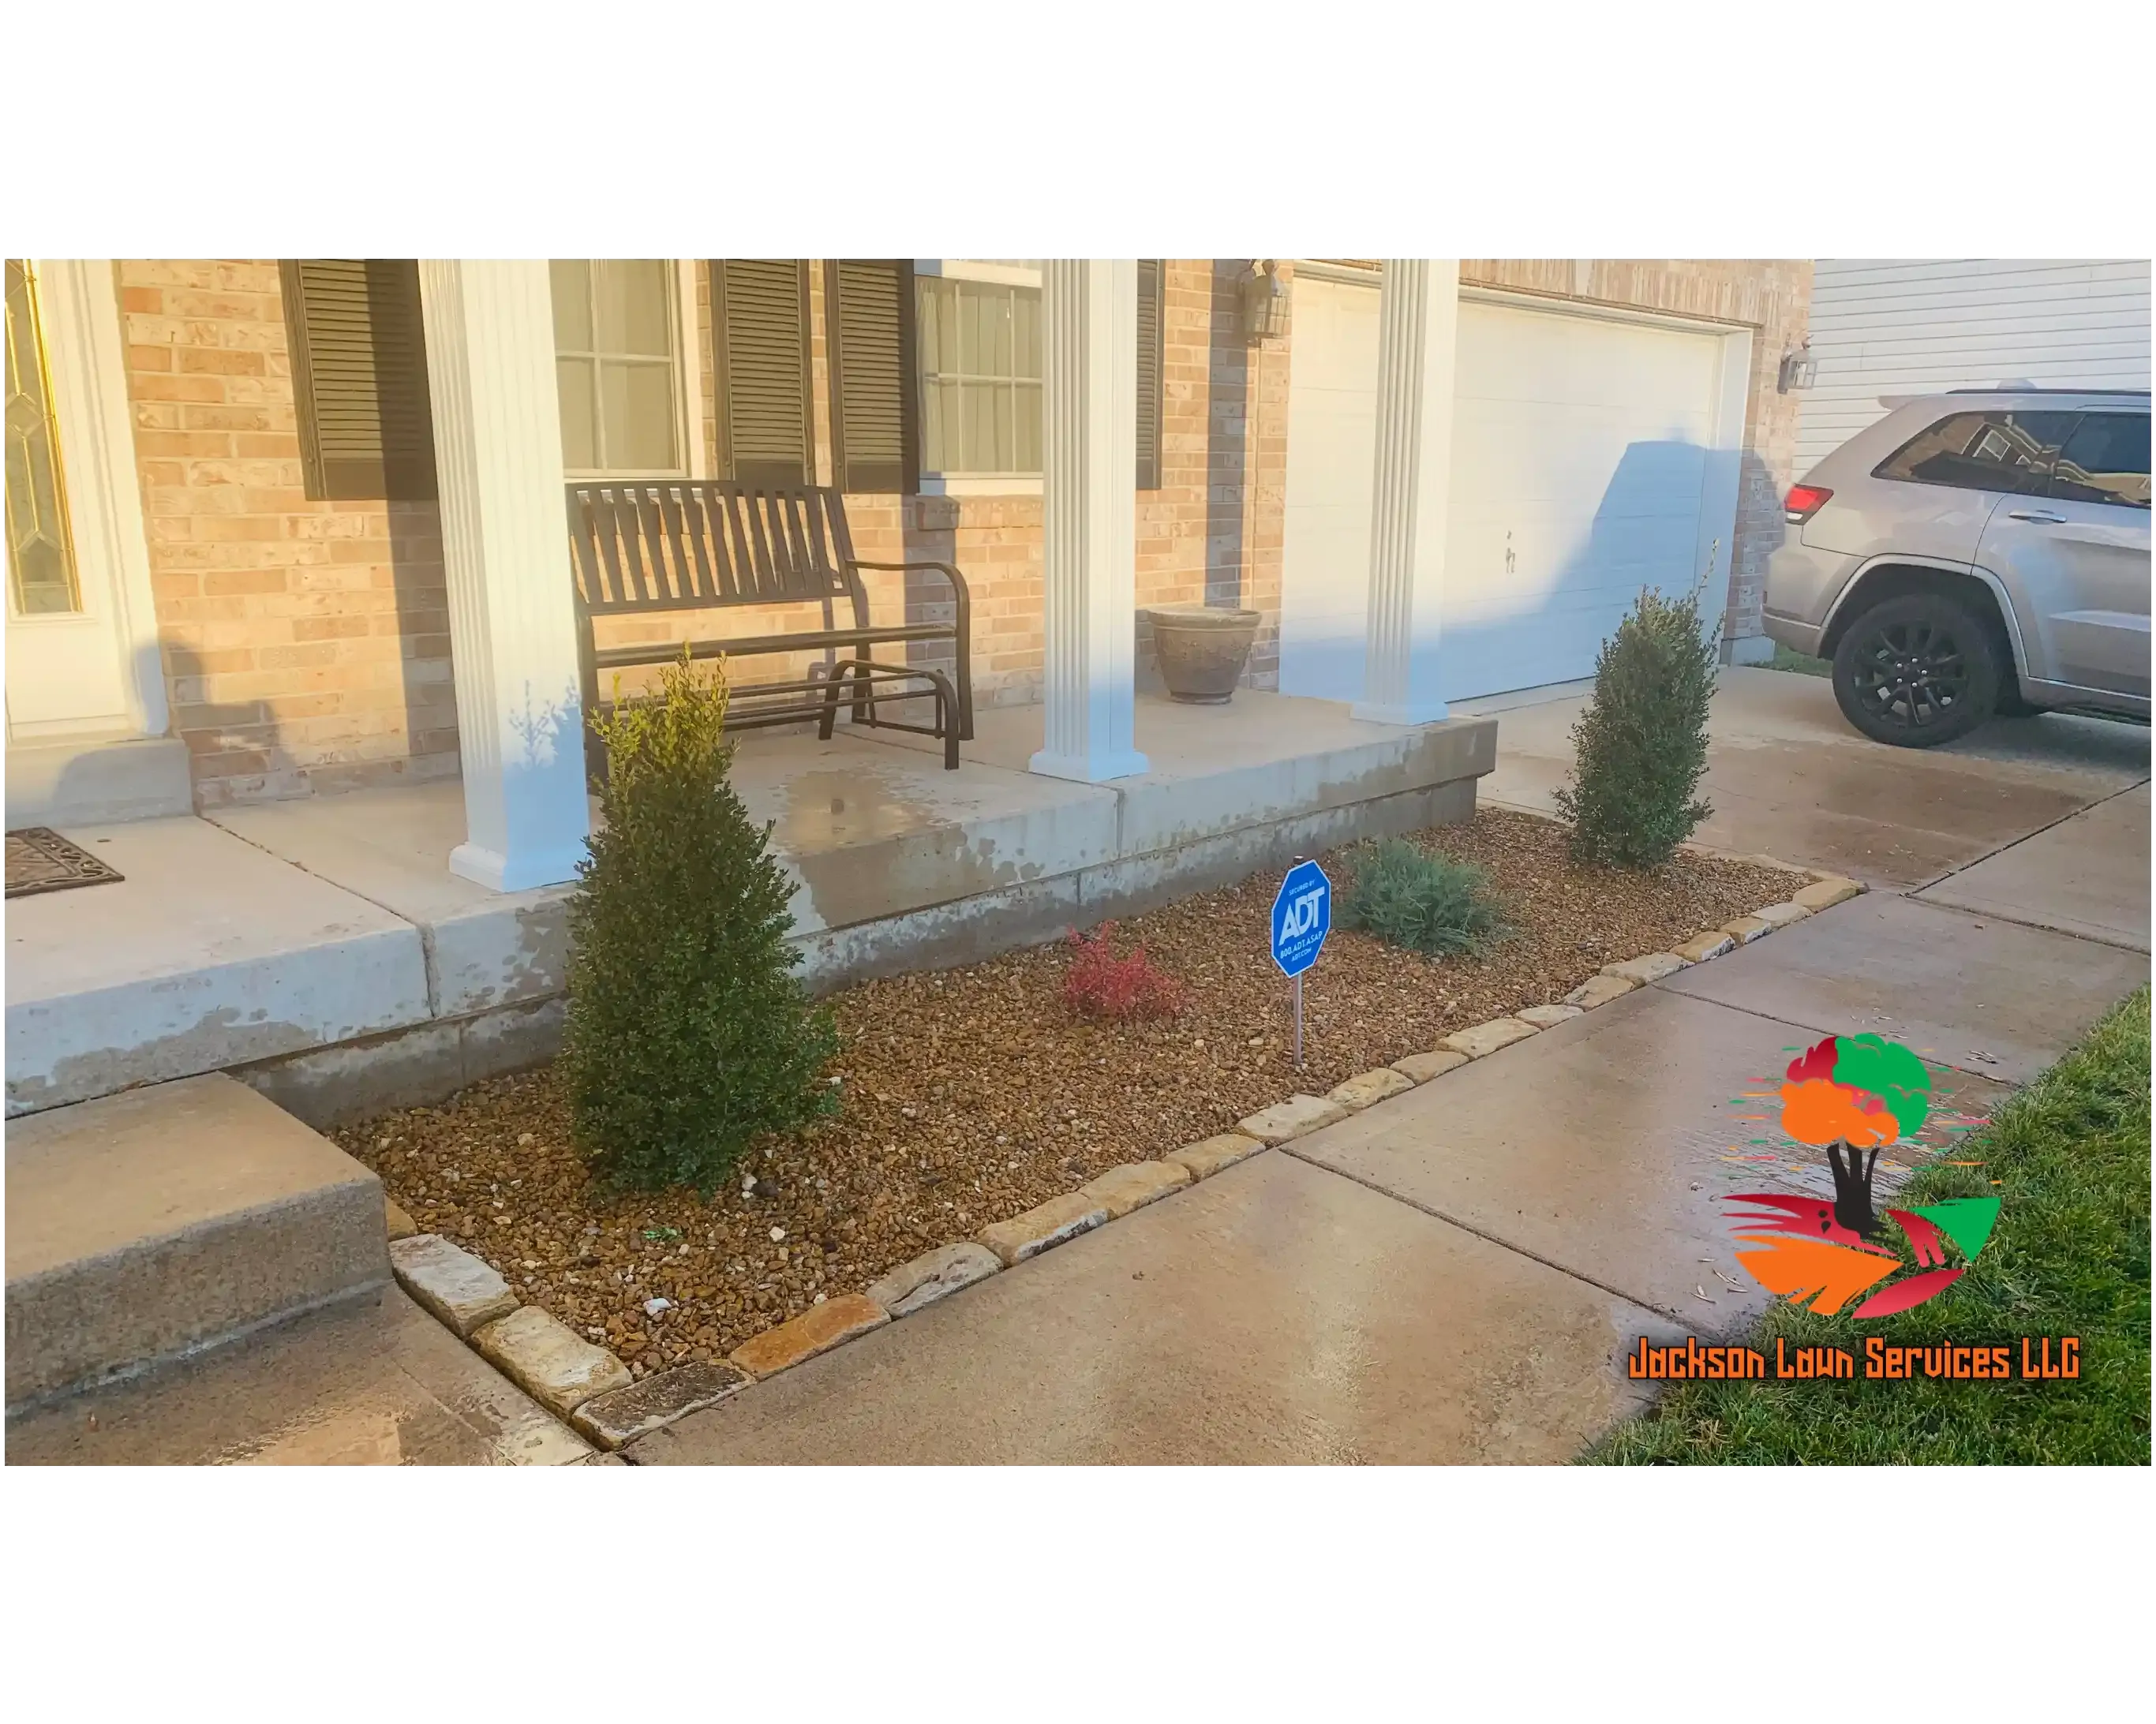 Leaf Removal  for Jackson Lawn Services LLC in Florissant, MO